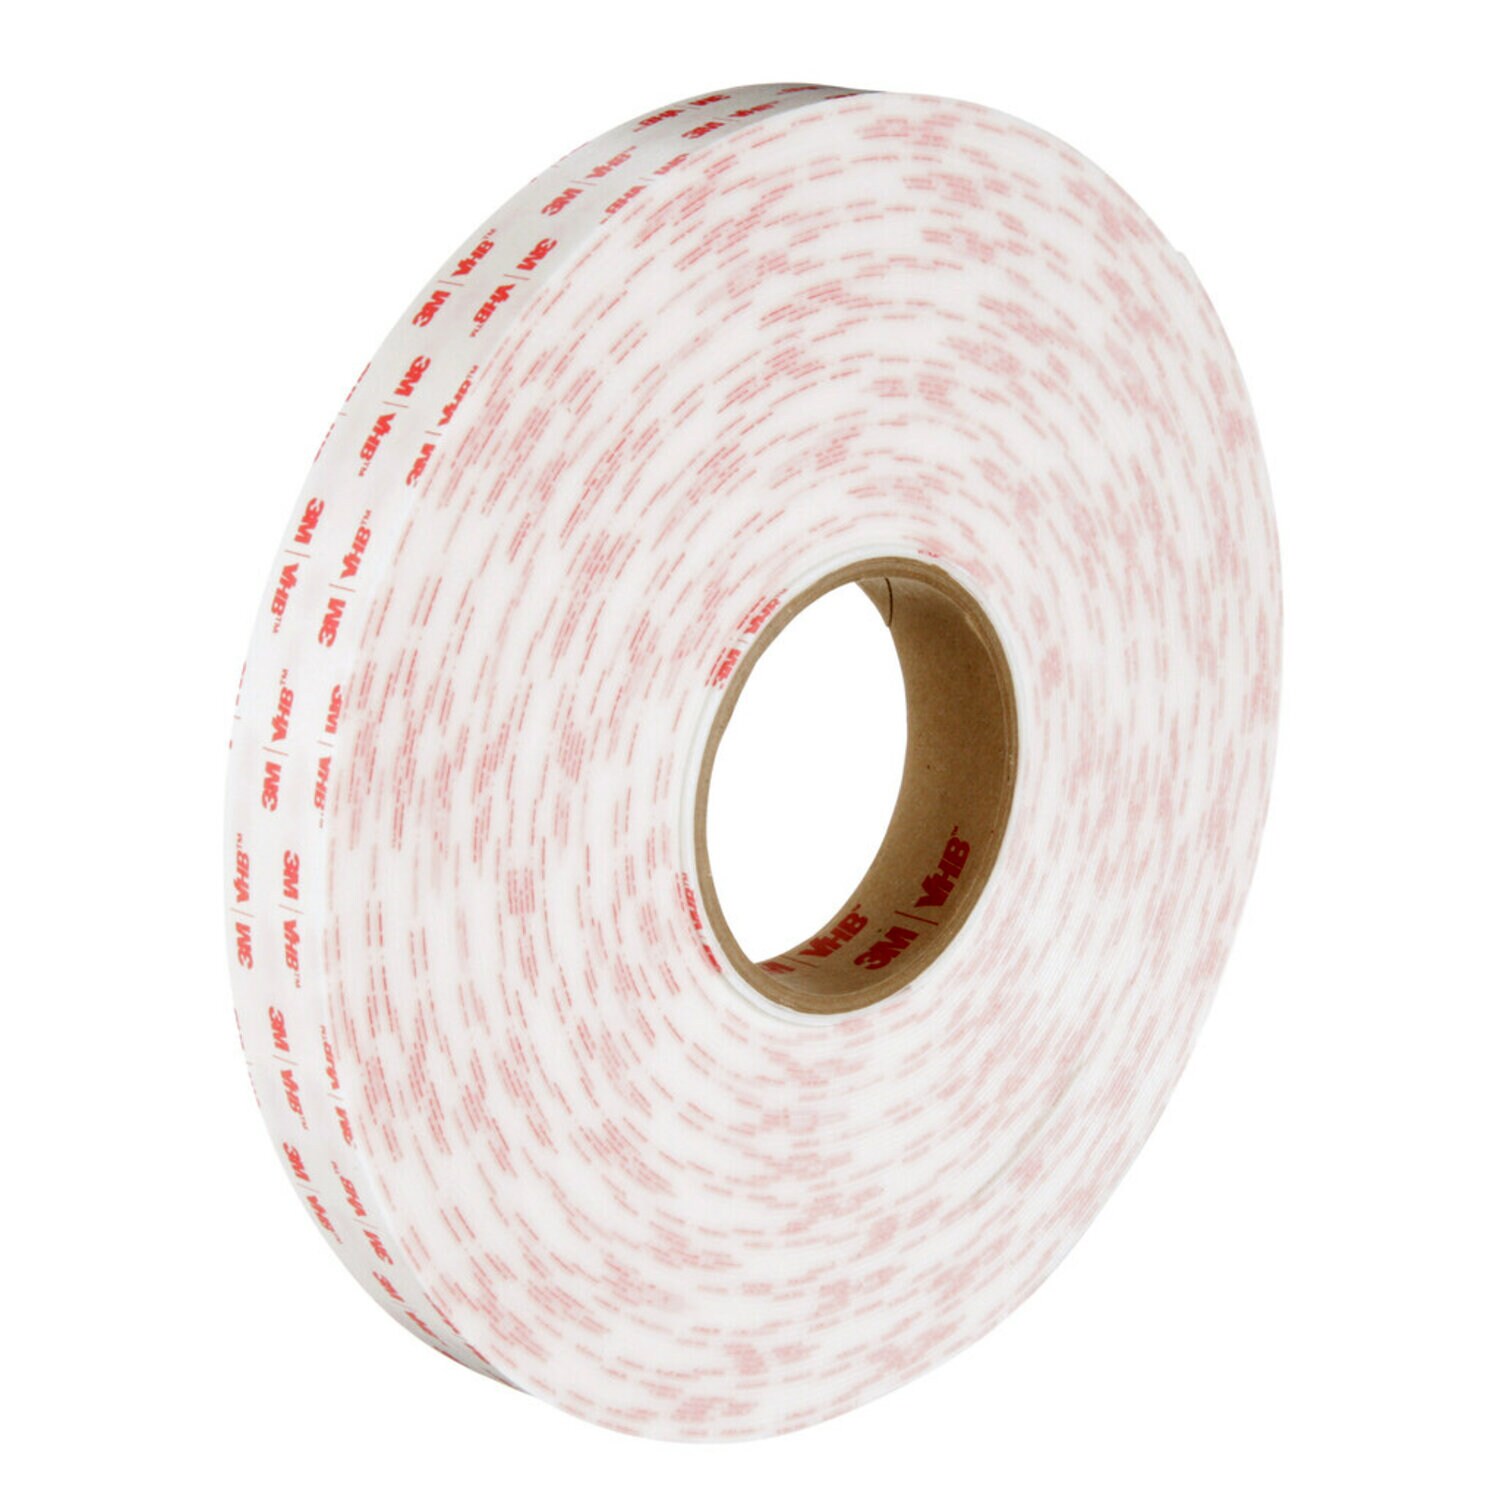 3M VHB 5915 Adhesive Mounting Tape for Aluminum - 100 ft